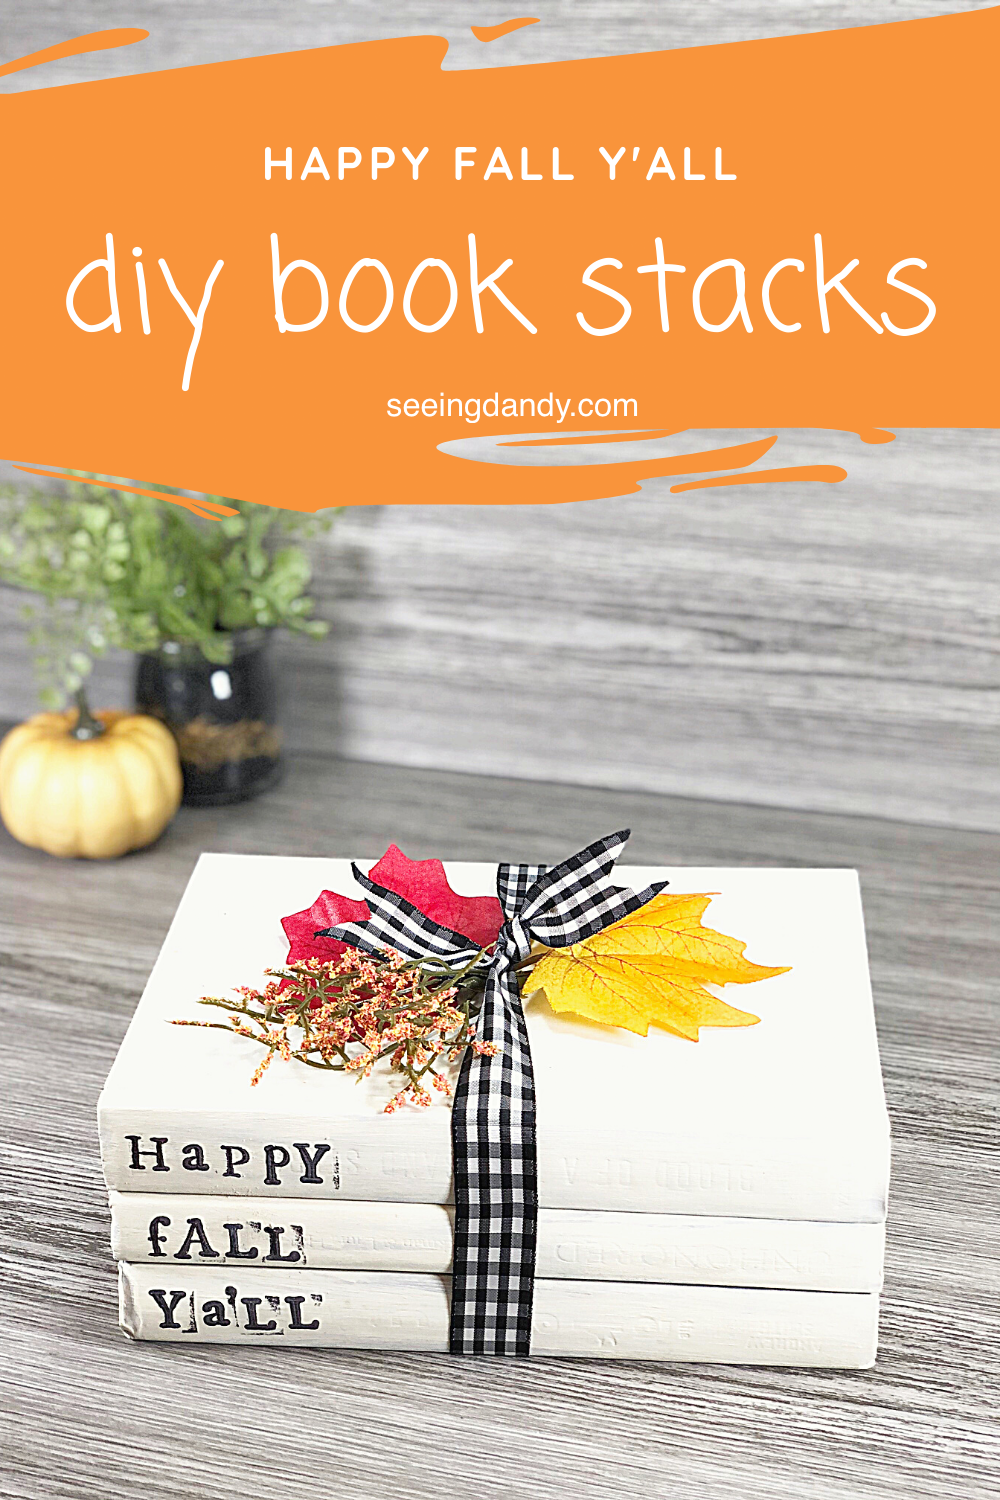 easy diy stamped book stacks, fall decor, fall decorating, happy fall yall, fall leaves, yellow pumpkin, farmhouse style